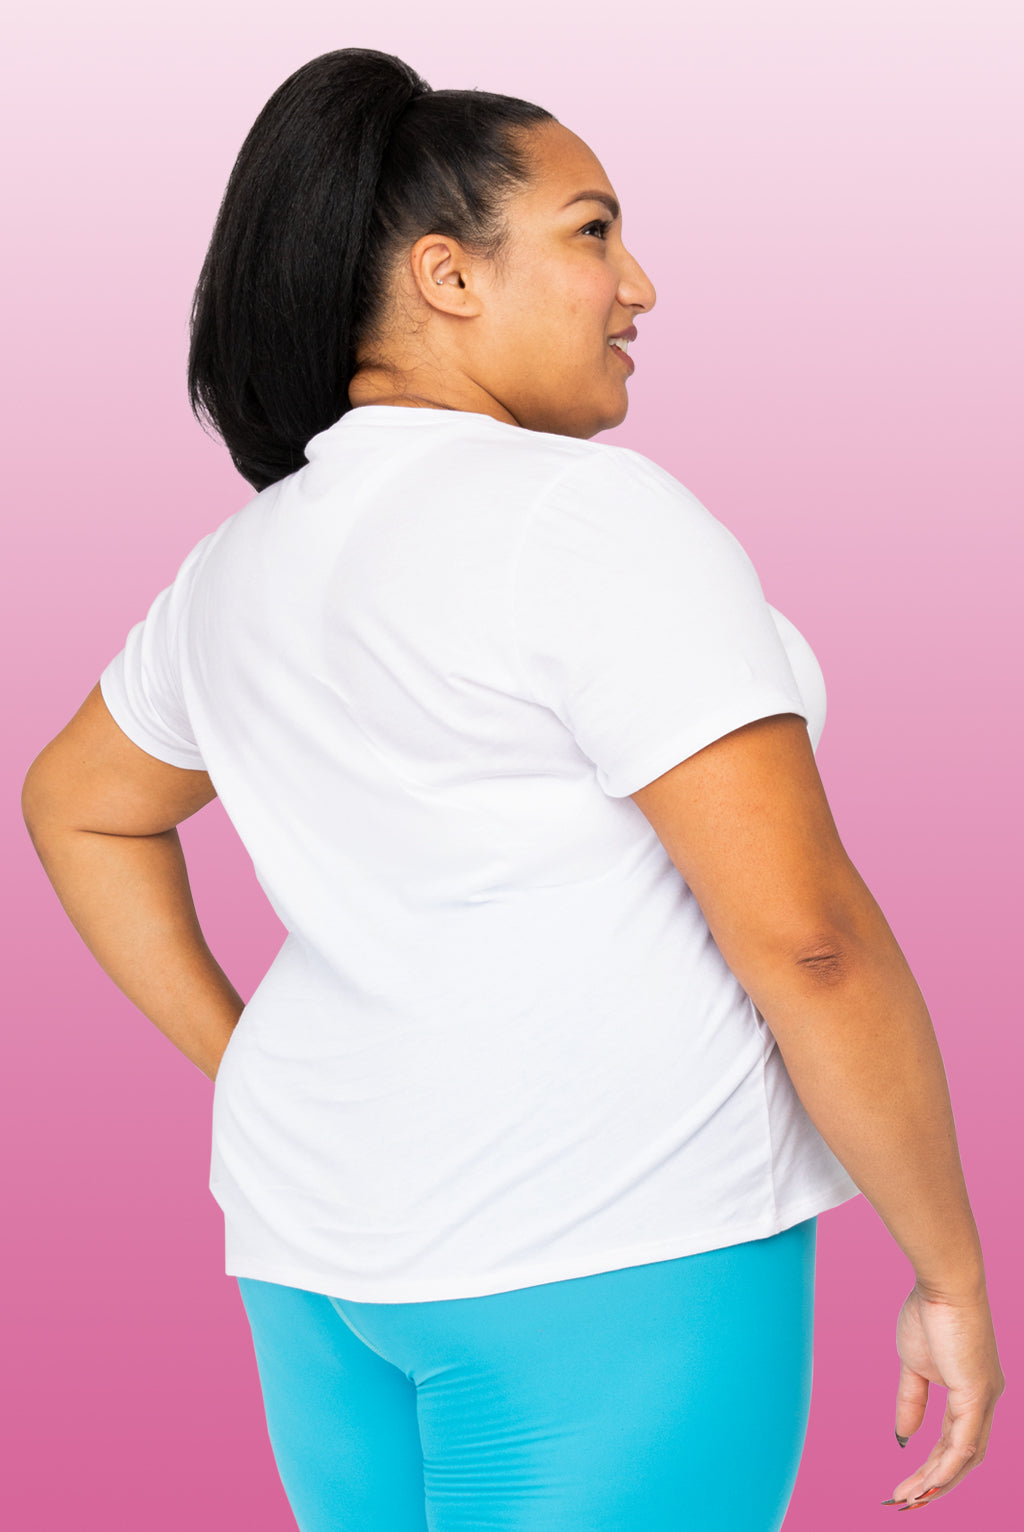 White Cotton Graphic Tee "Self Love", Valentines Day, Galentines Day, Plus Size, back